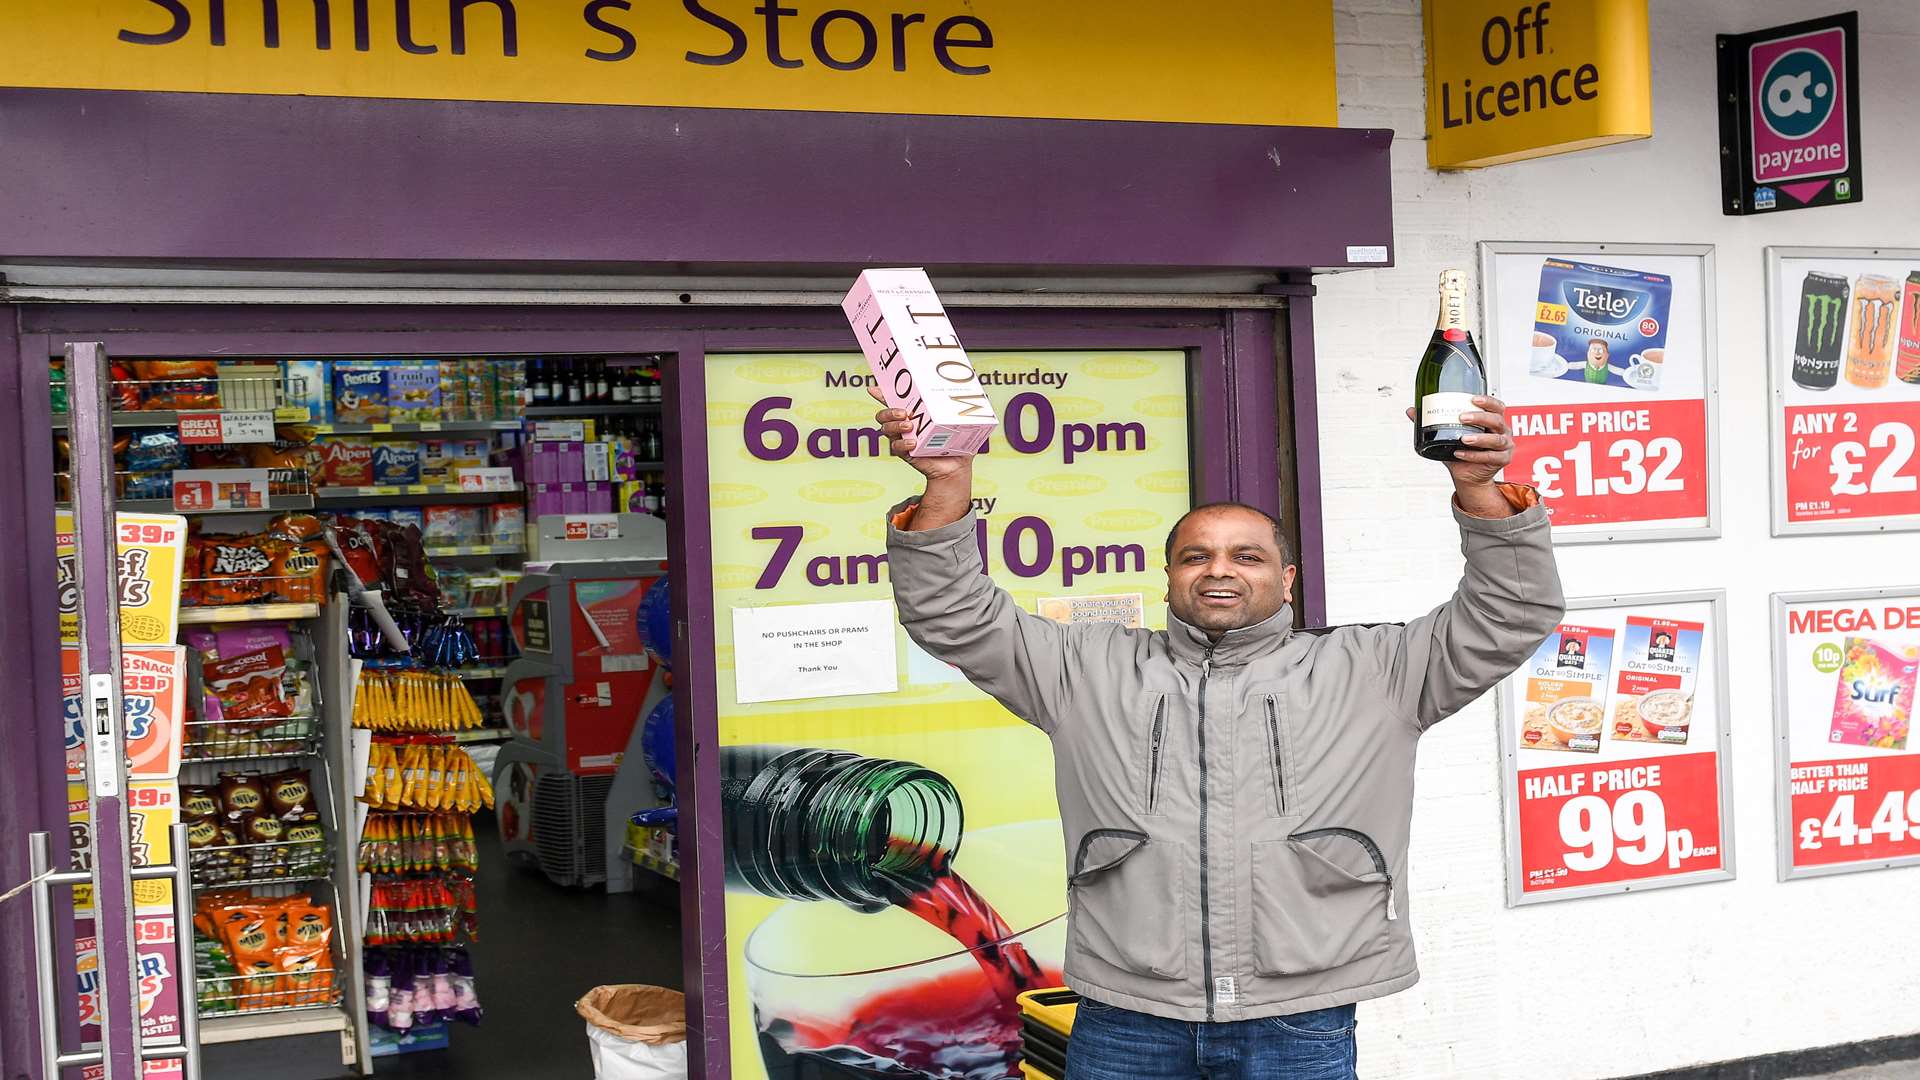 Waiting to celebrate: Darren Sri of Smith's Store with bottle of champagne. Picture: Steve Finn Photography